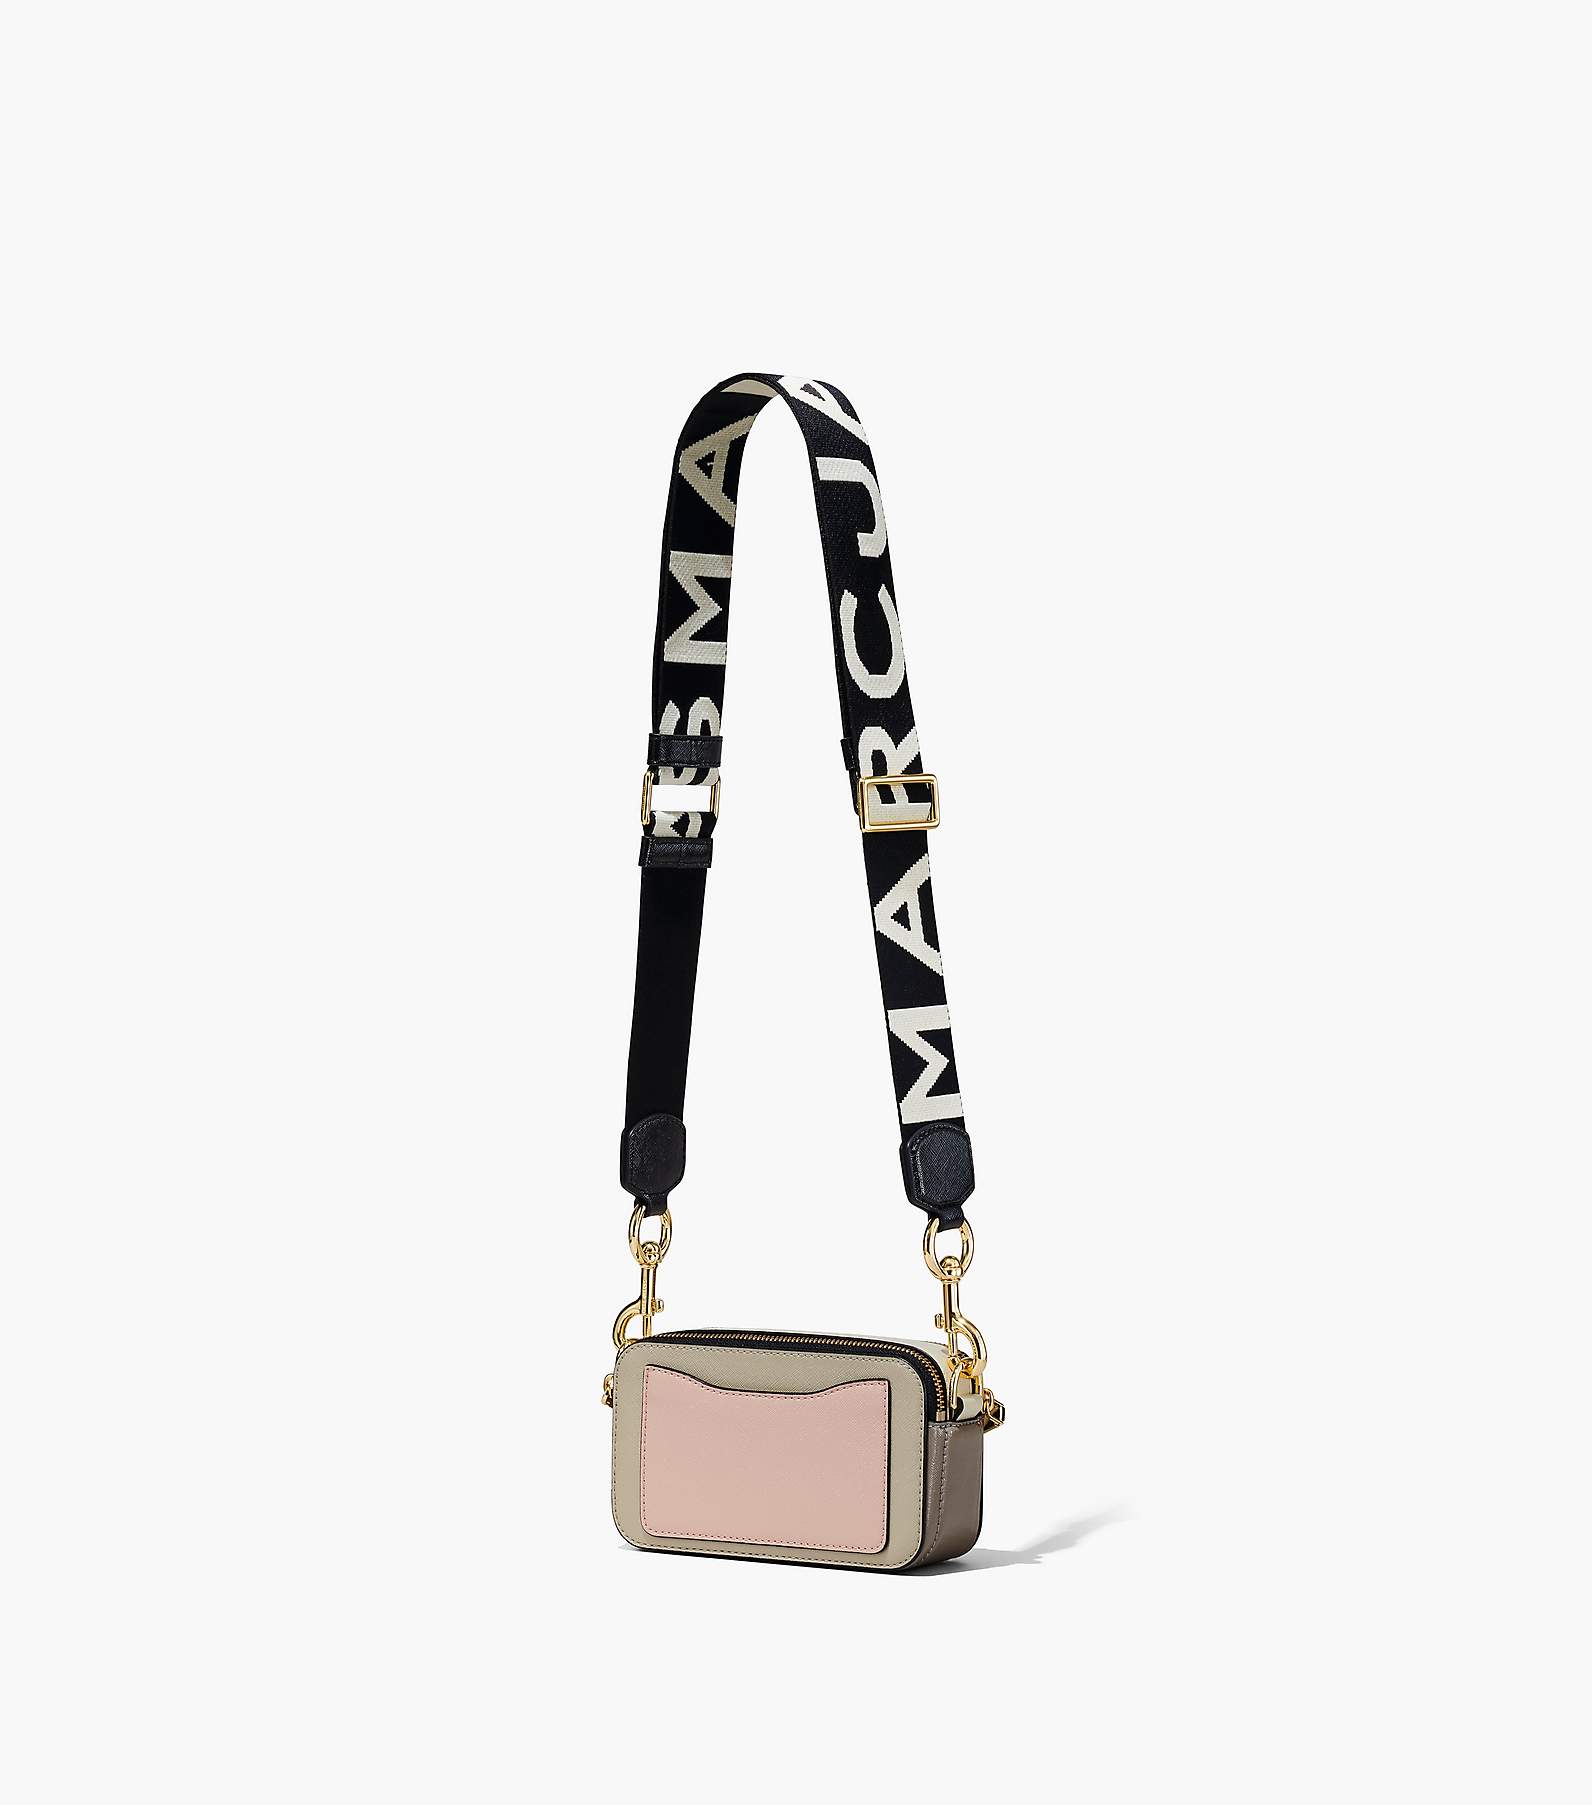 Find Out Where To Get The Dress  Marc jacobs snapshot bag, Bags